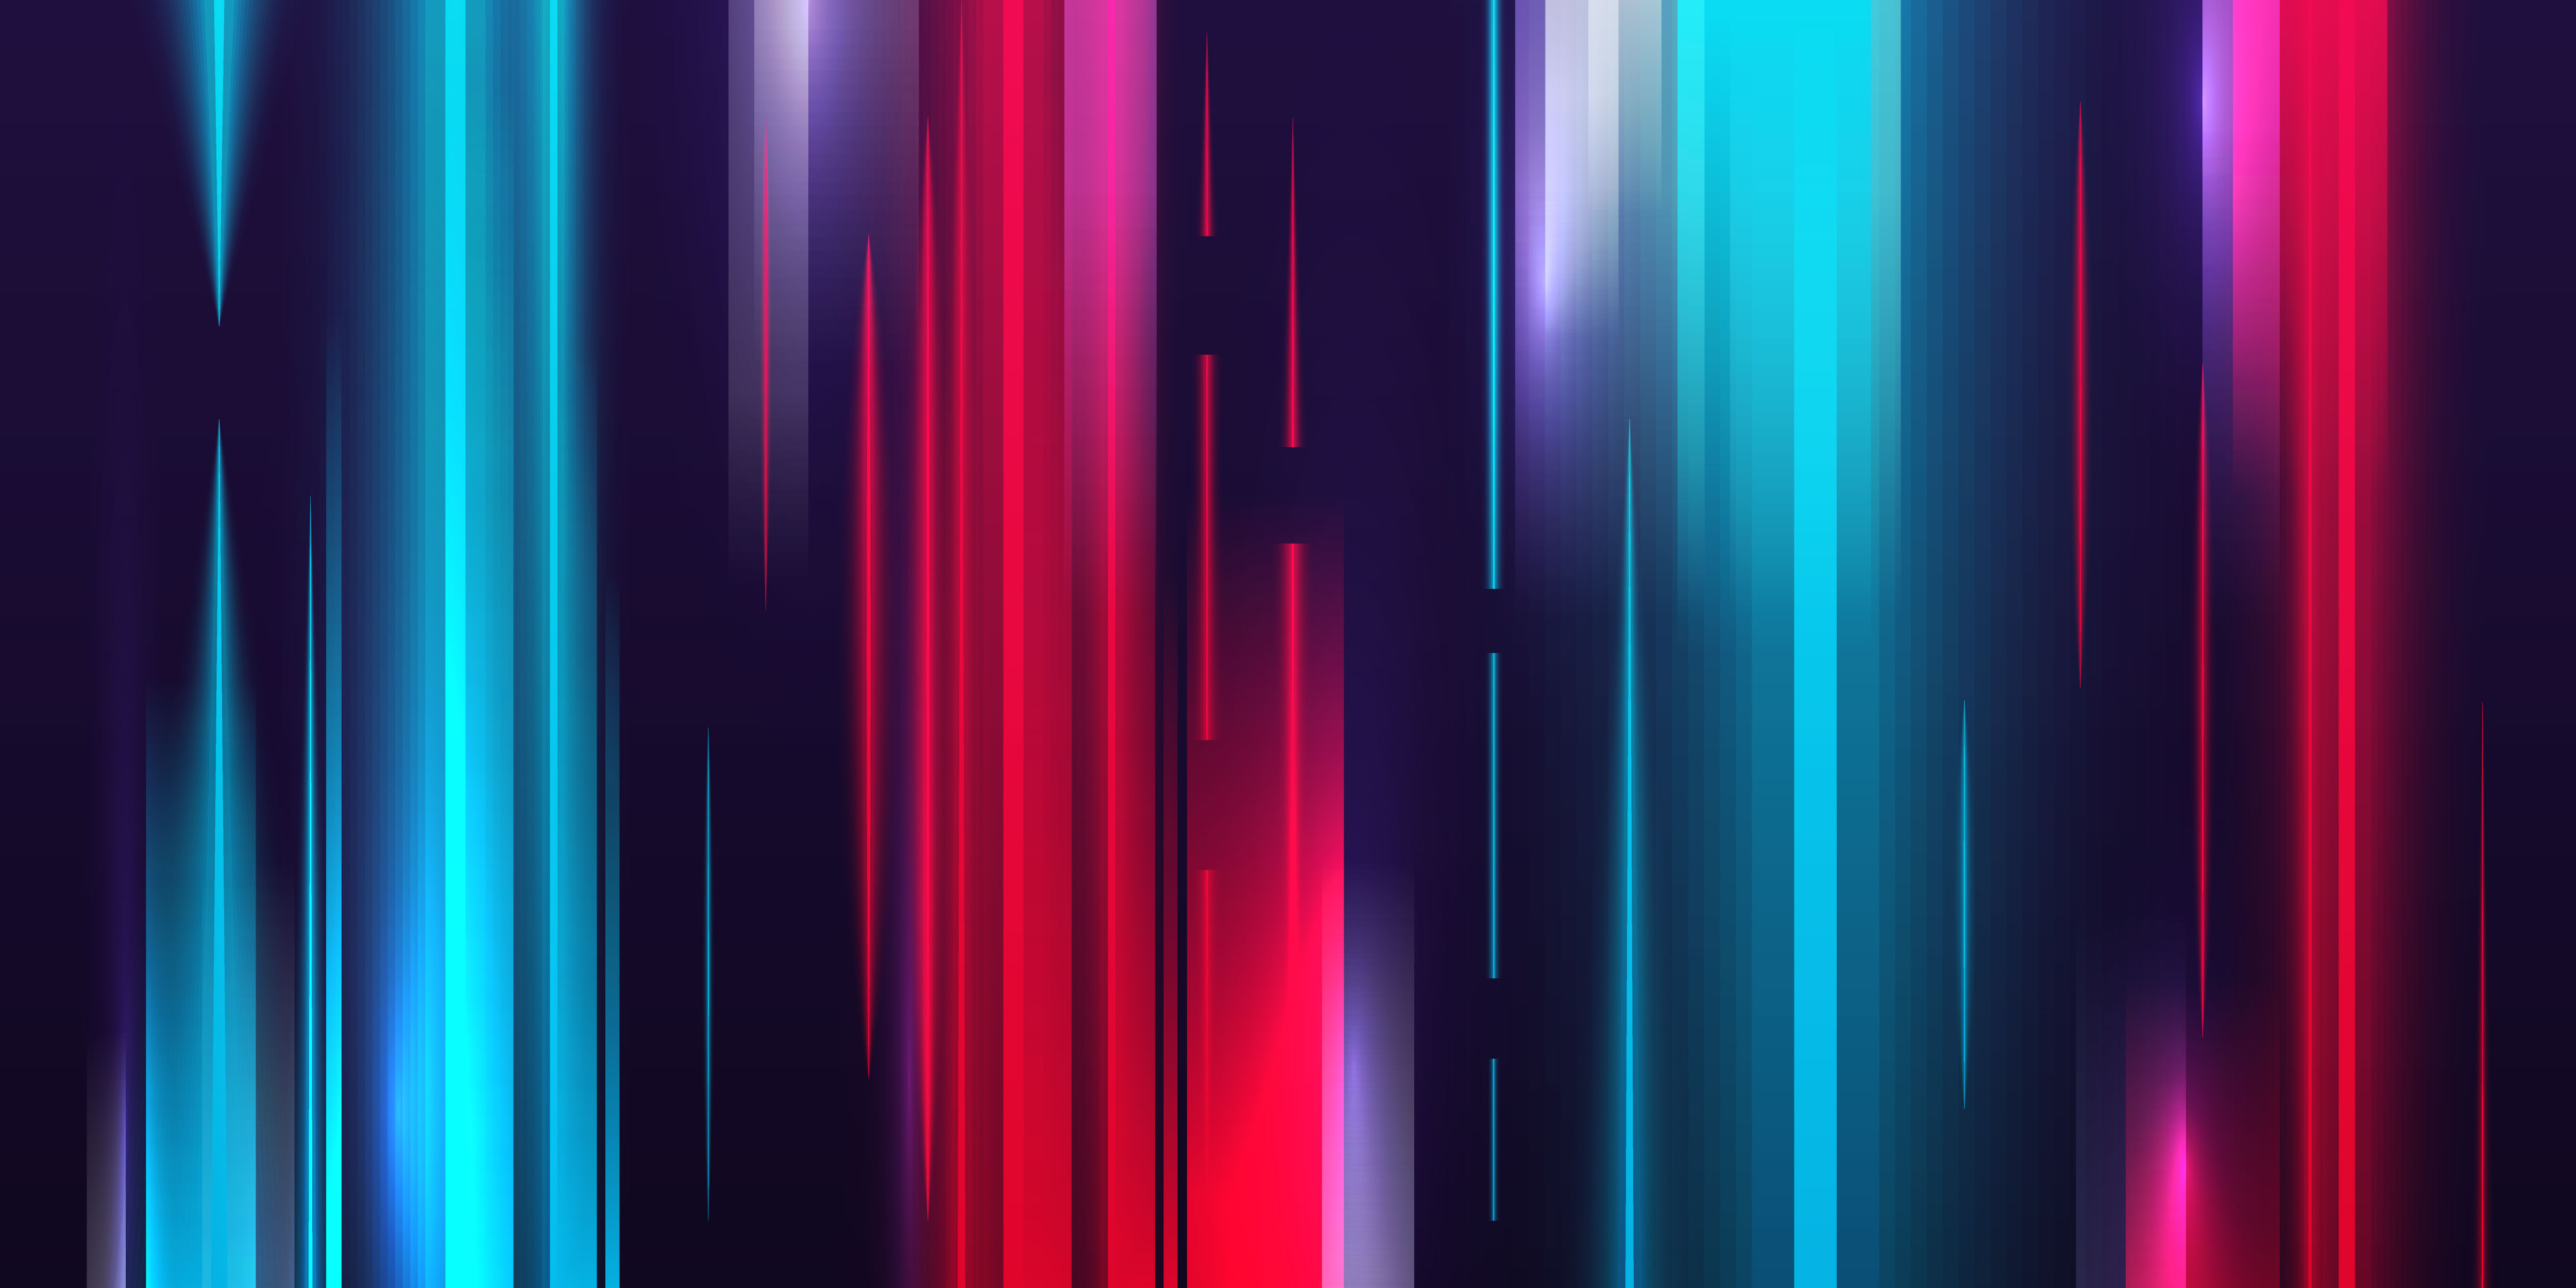 Vertical Lines Colorful Abstract 4k Vertical Lines Colorful Abstract 4k wallpapers